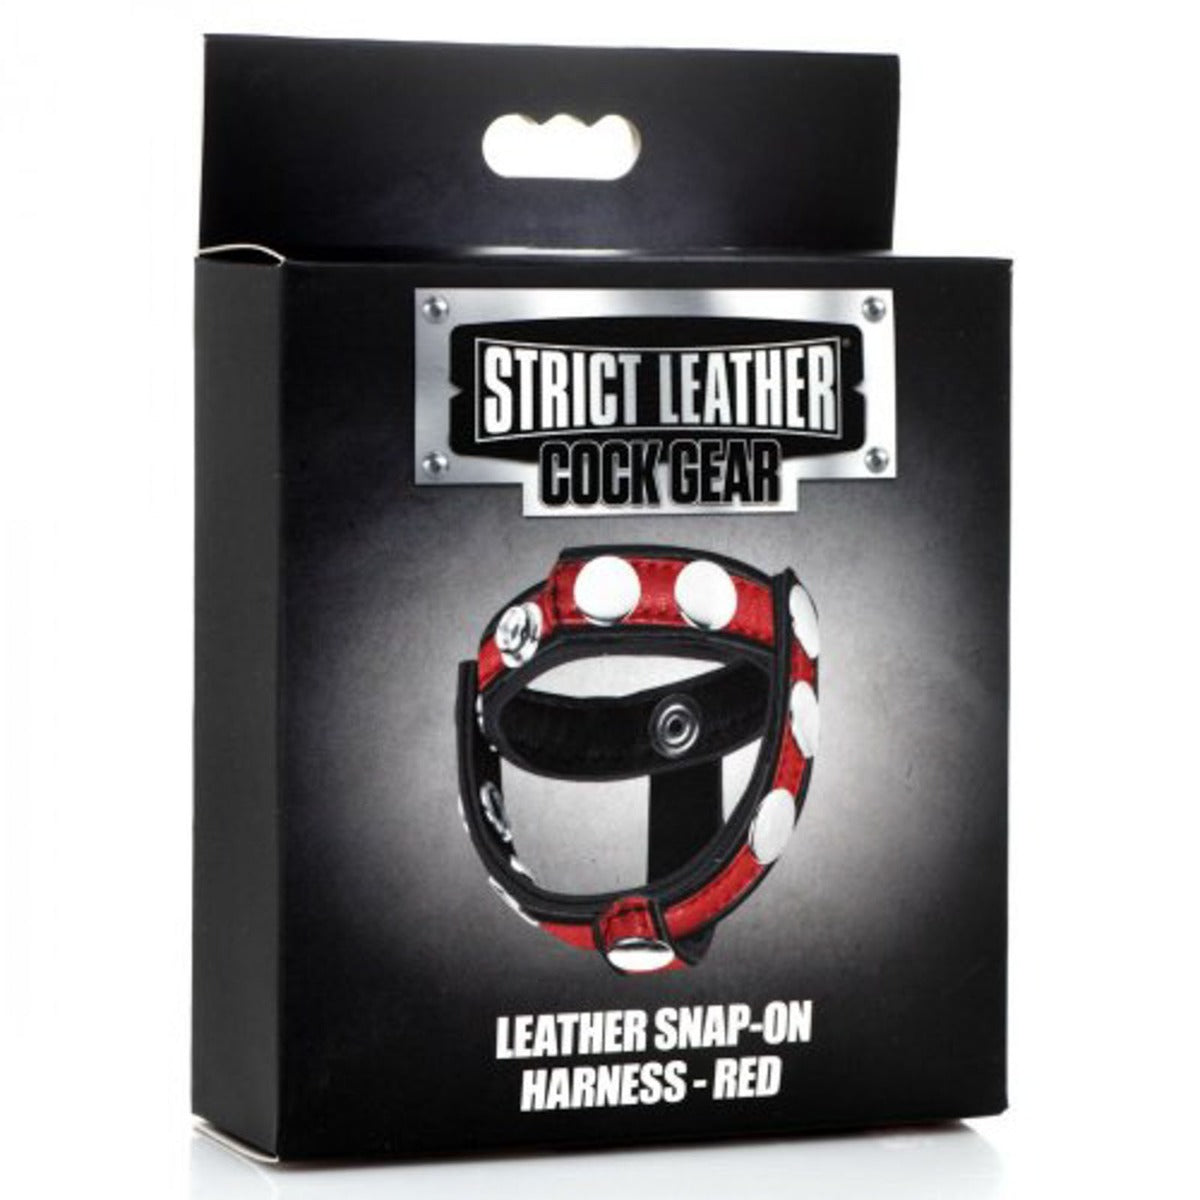 Strict Leather Cock Gear Leather Snap-On Harness Red/Black (8182724460783)